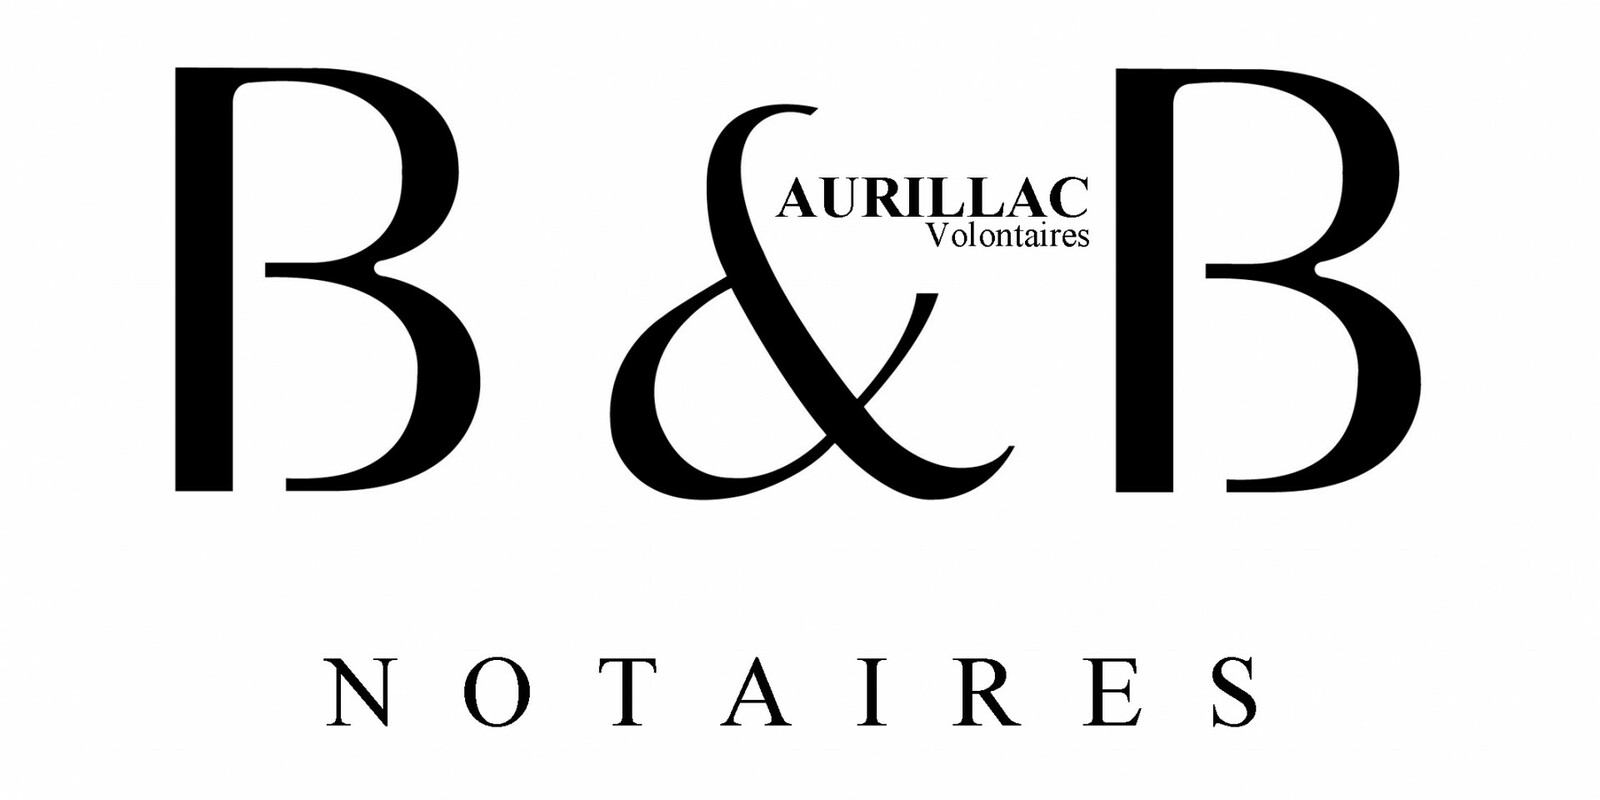 B&B Notaires Aurillac Volontaires